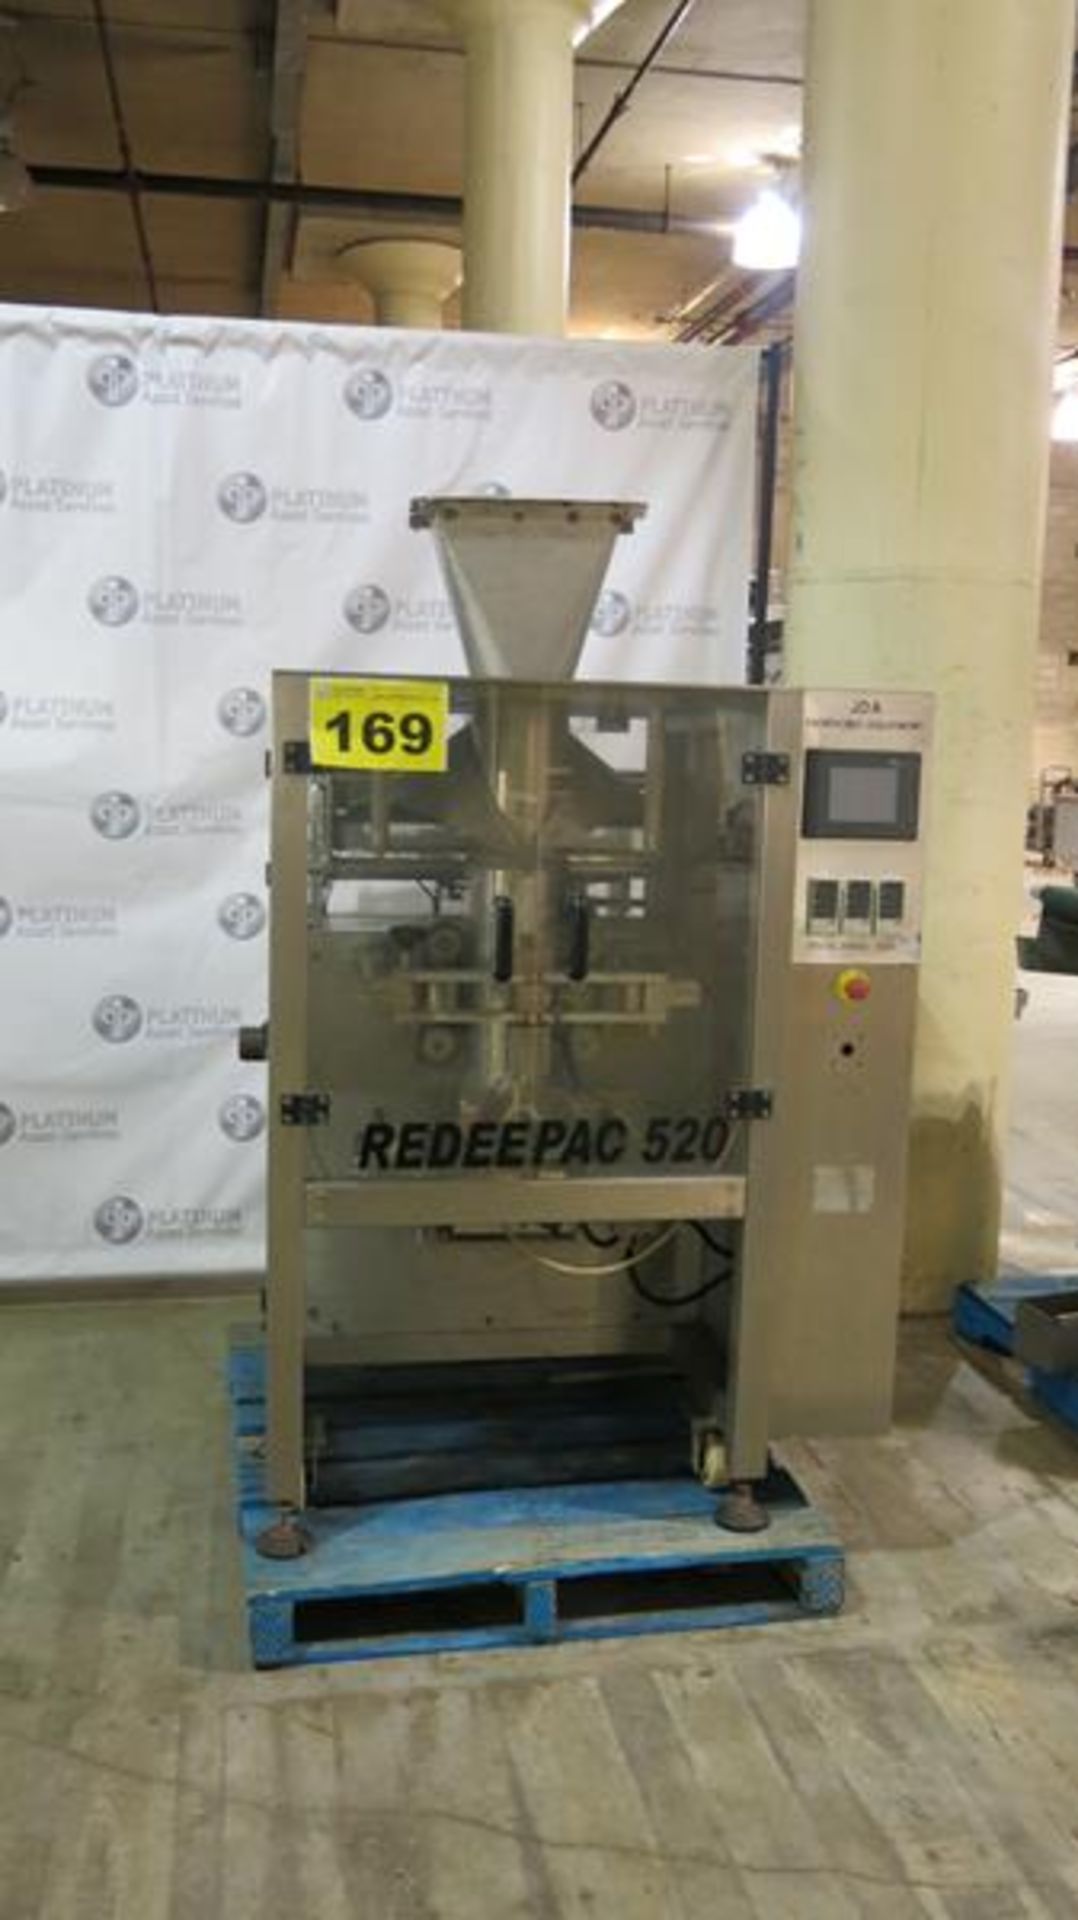 JDA, REDEEPAC 520, VERTICAL FORM FILL AND SEAL MACHINE (RIGGING $150) - Image 6 of 7